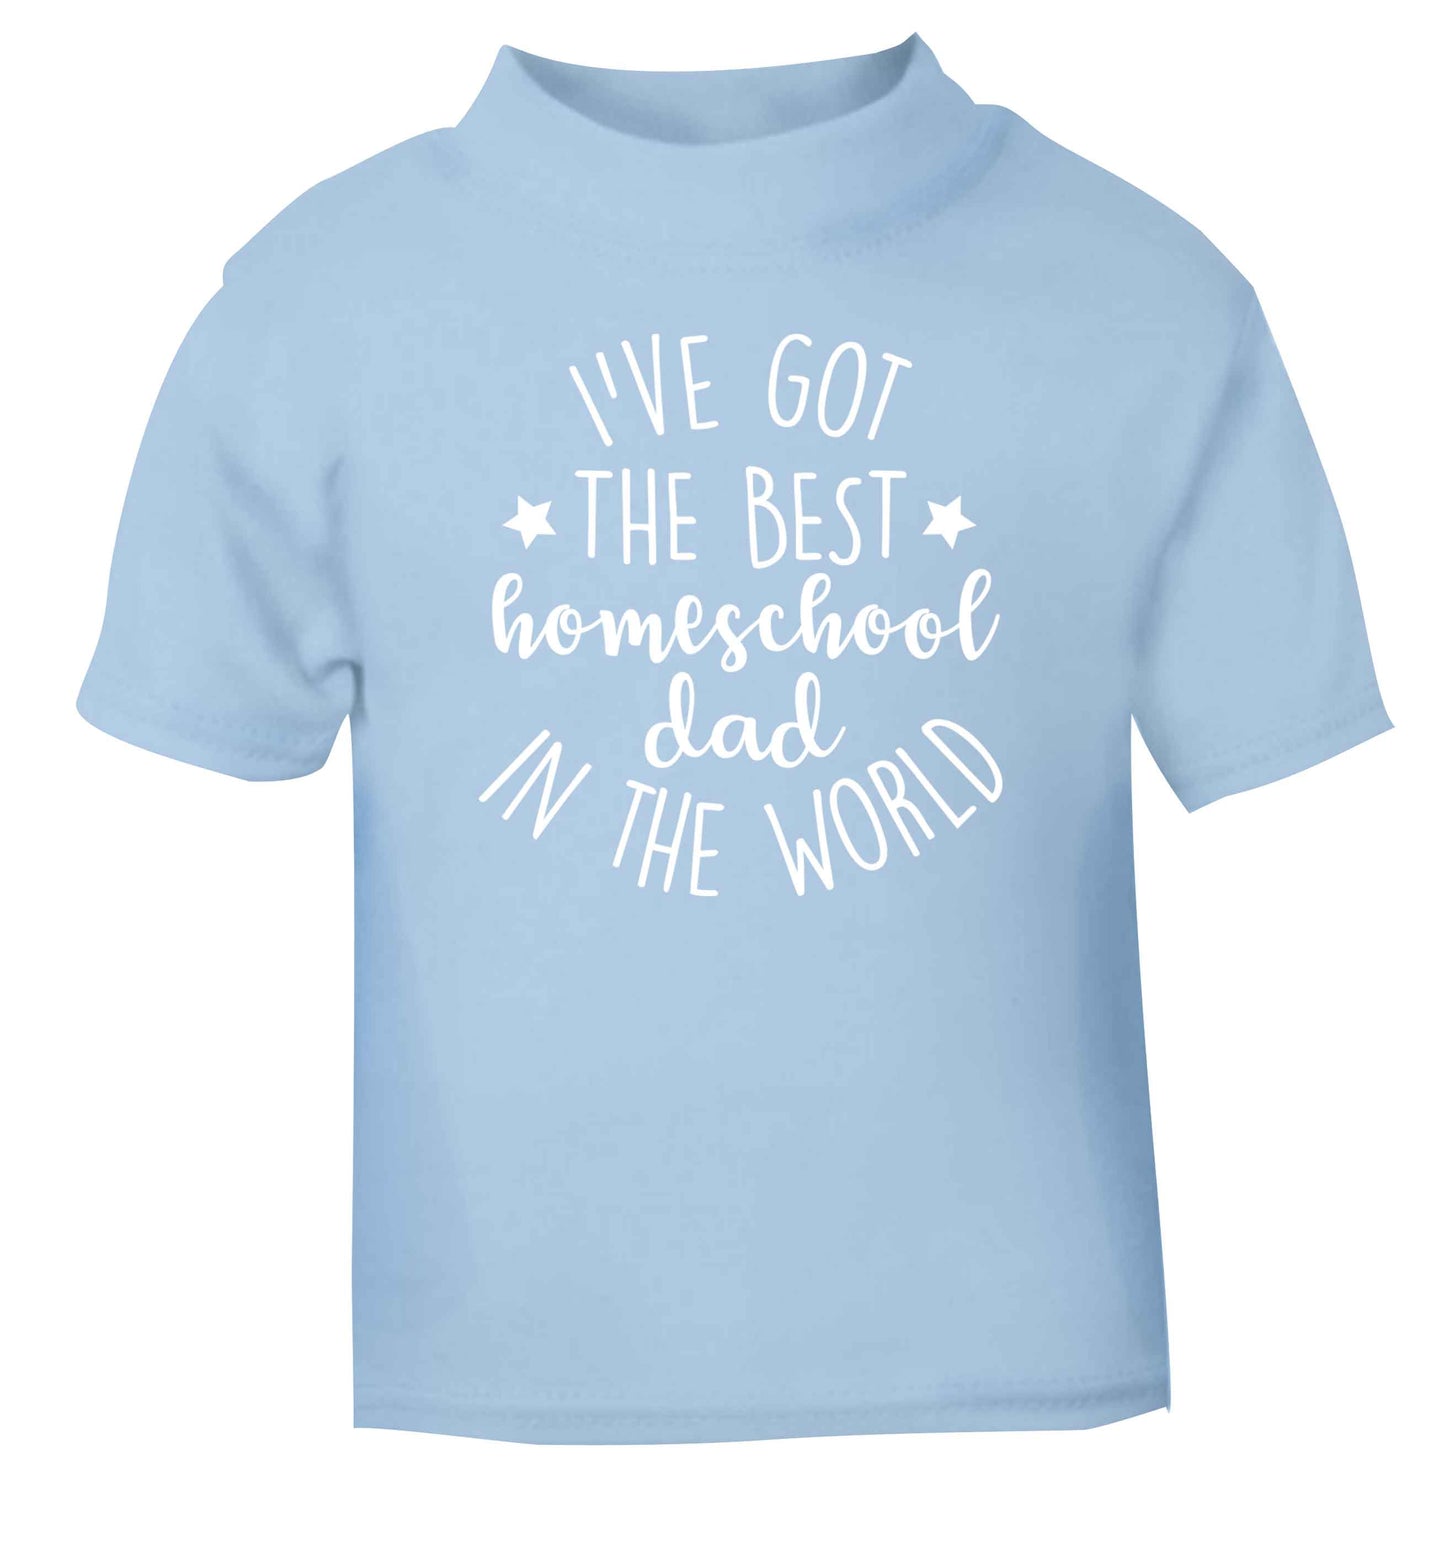 I've got the best homeschool dad in the world light blue Baby Toddler Tshirt 2 Years